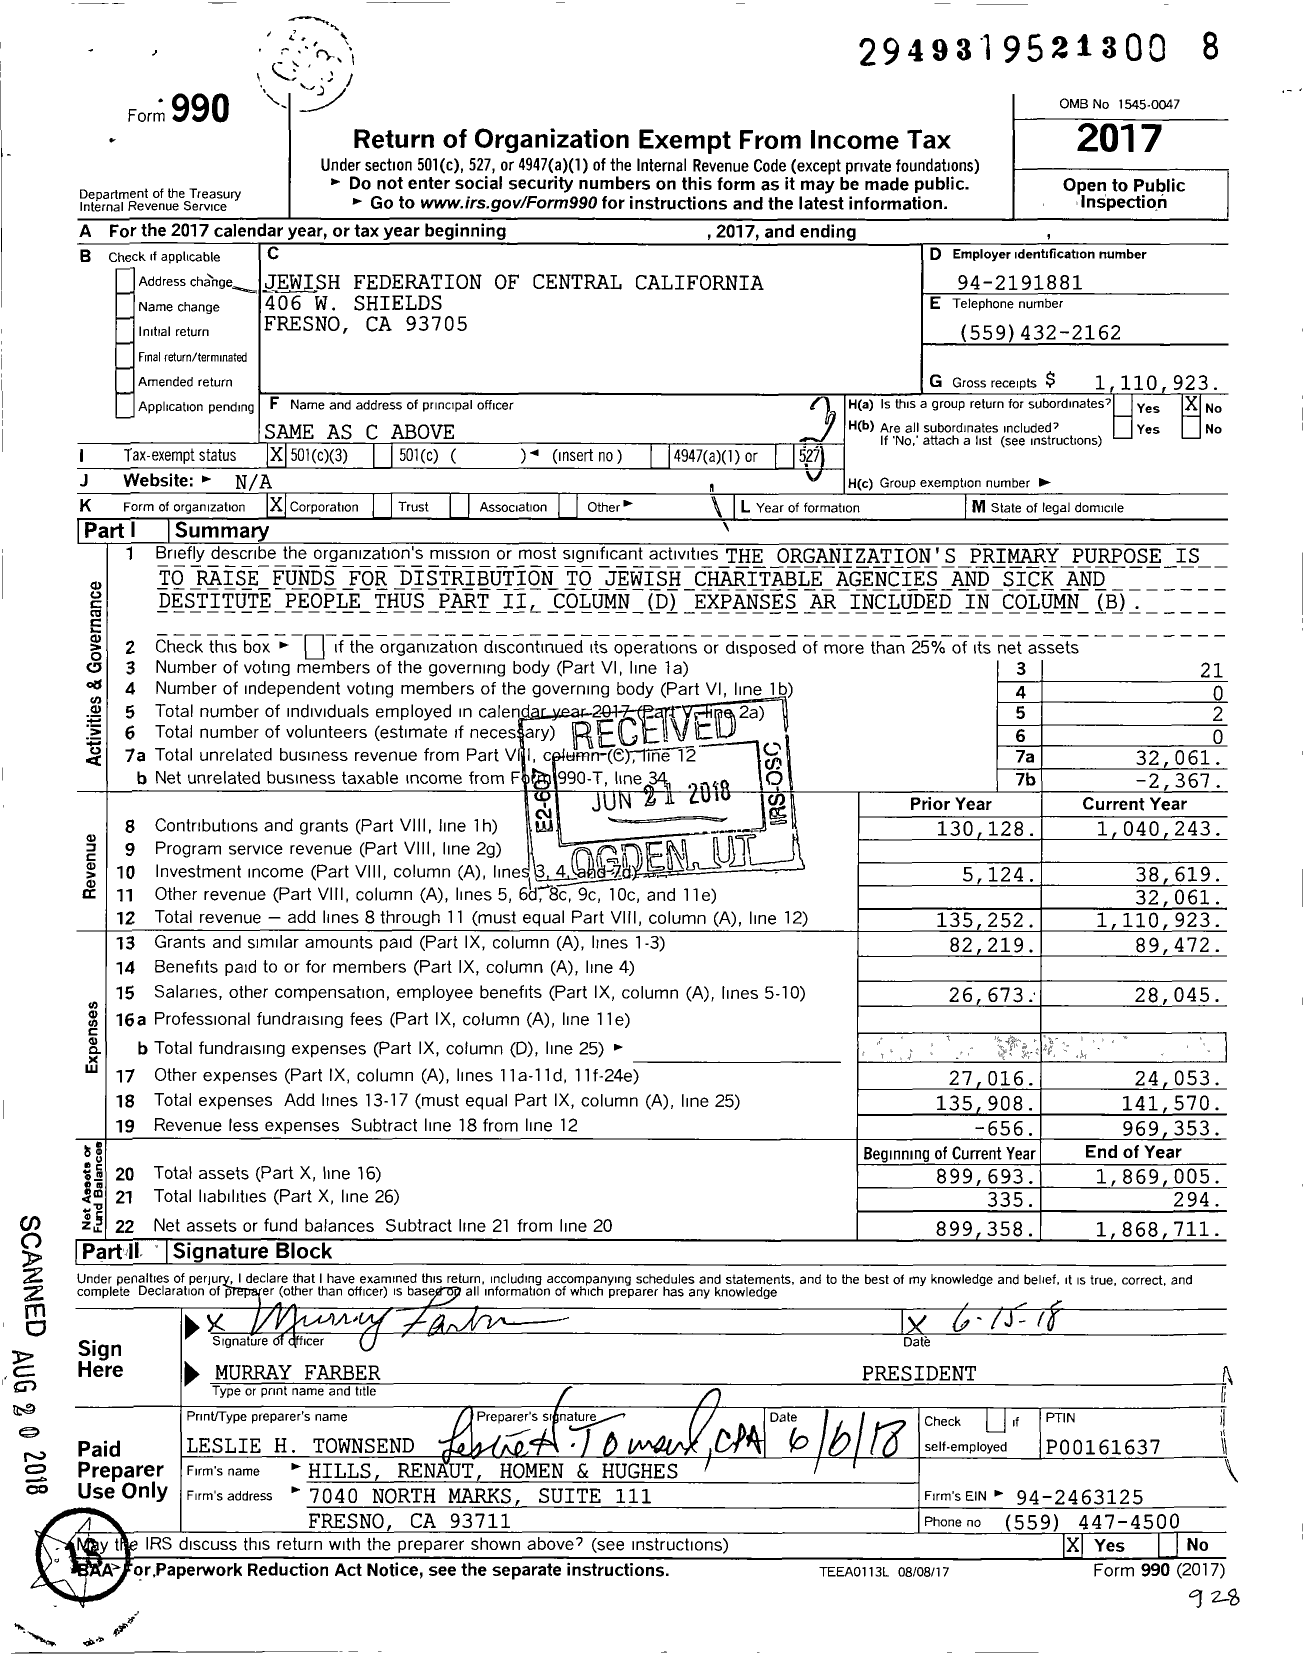 Image of first page of 2017 Form 990 for Jewish Federation of Central California